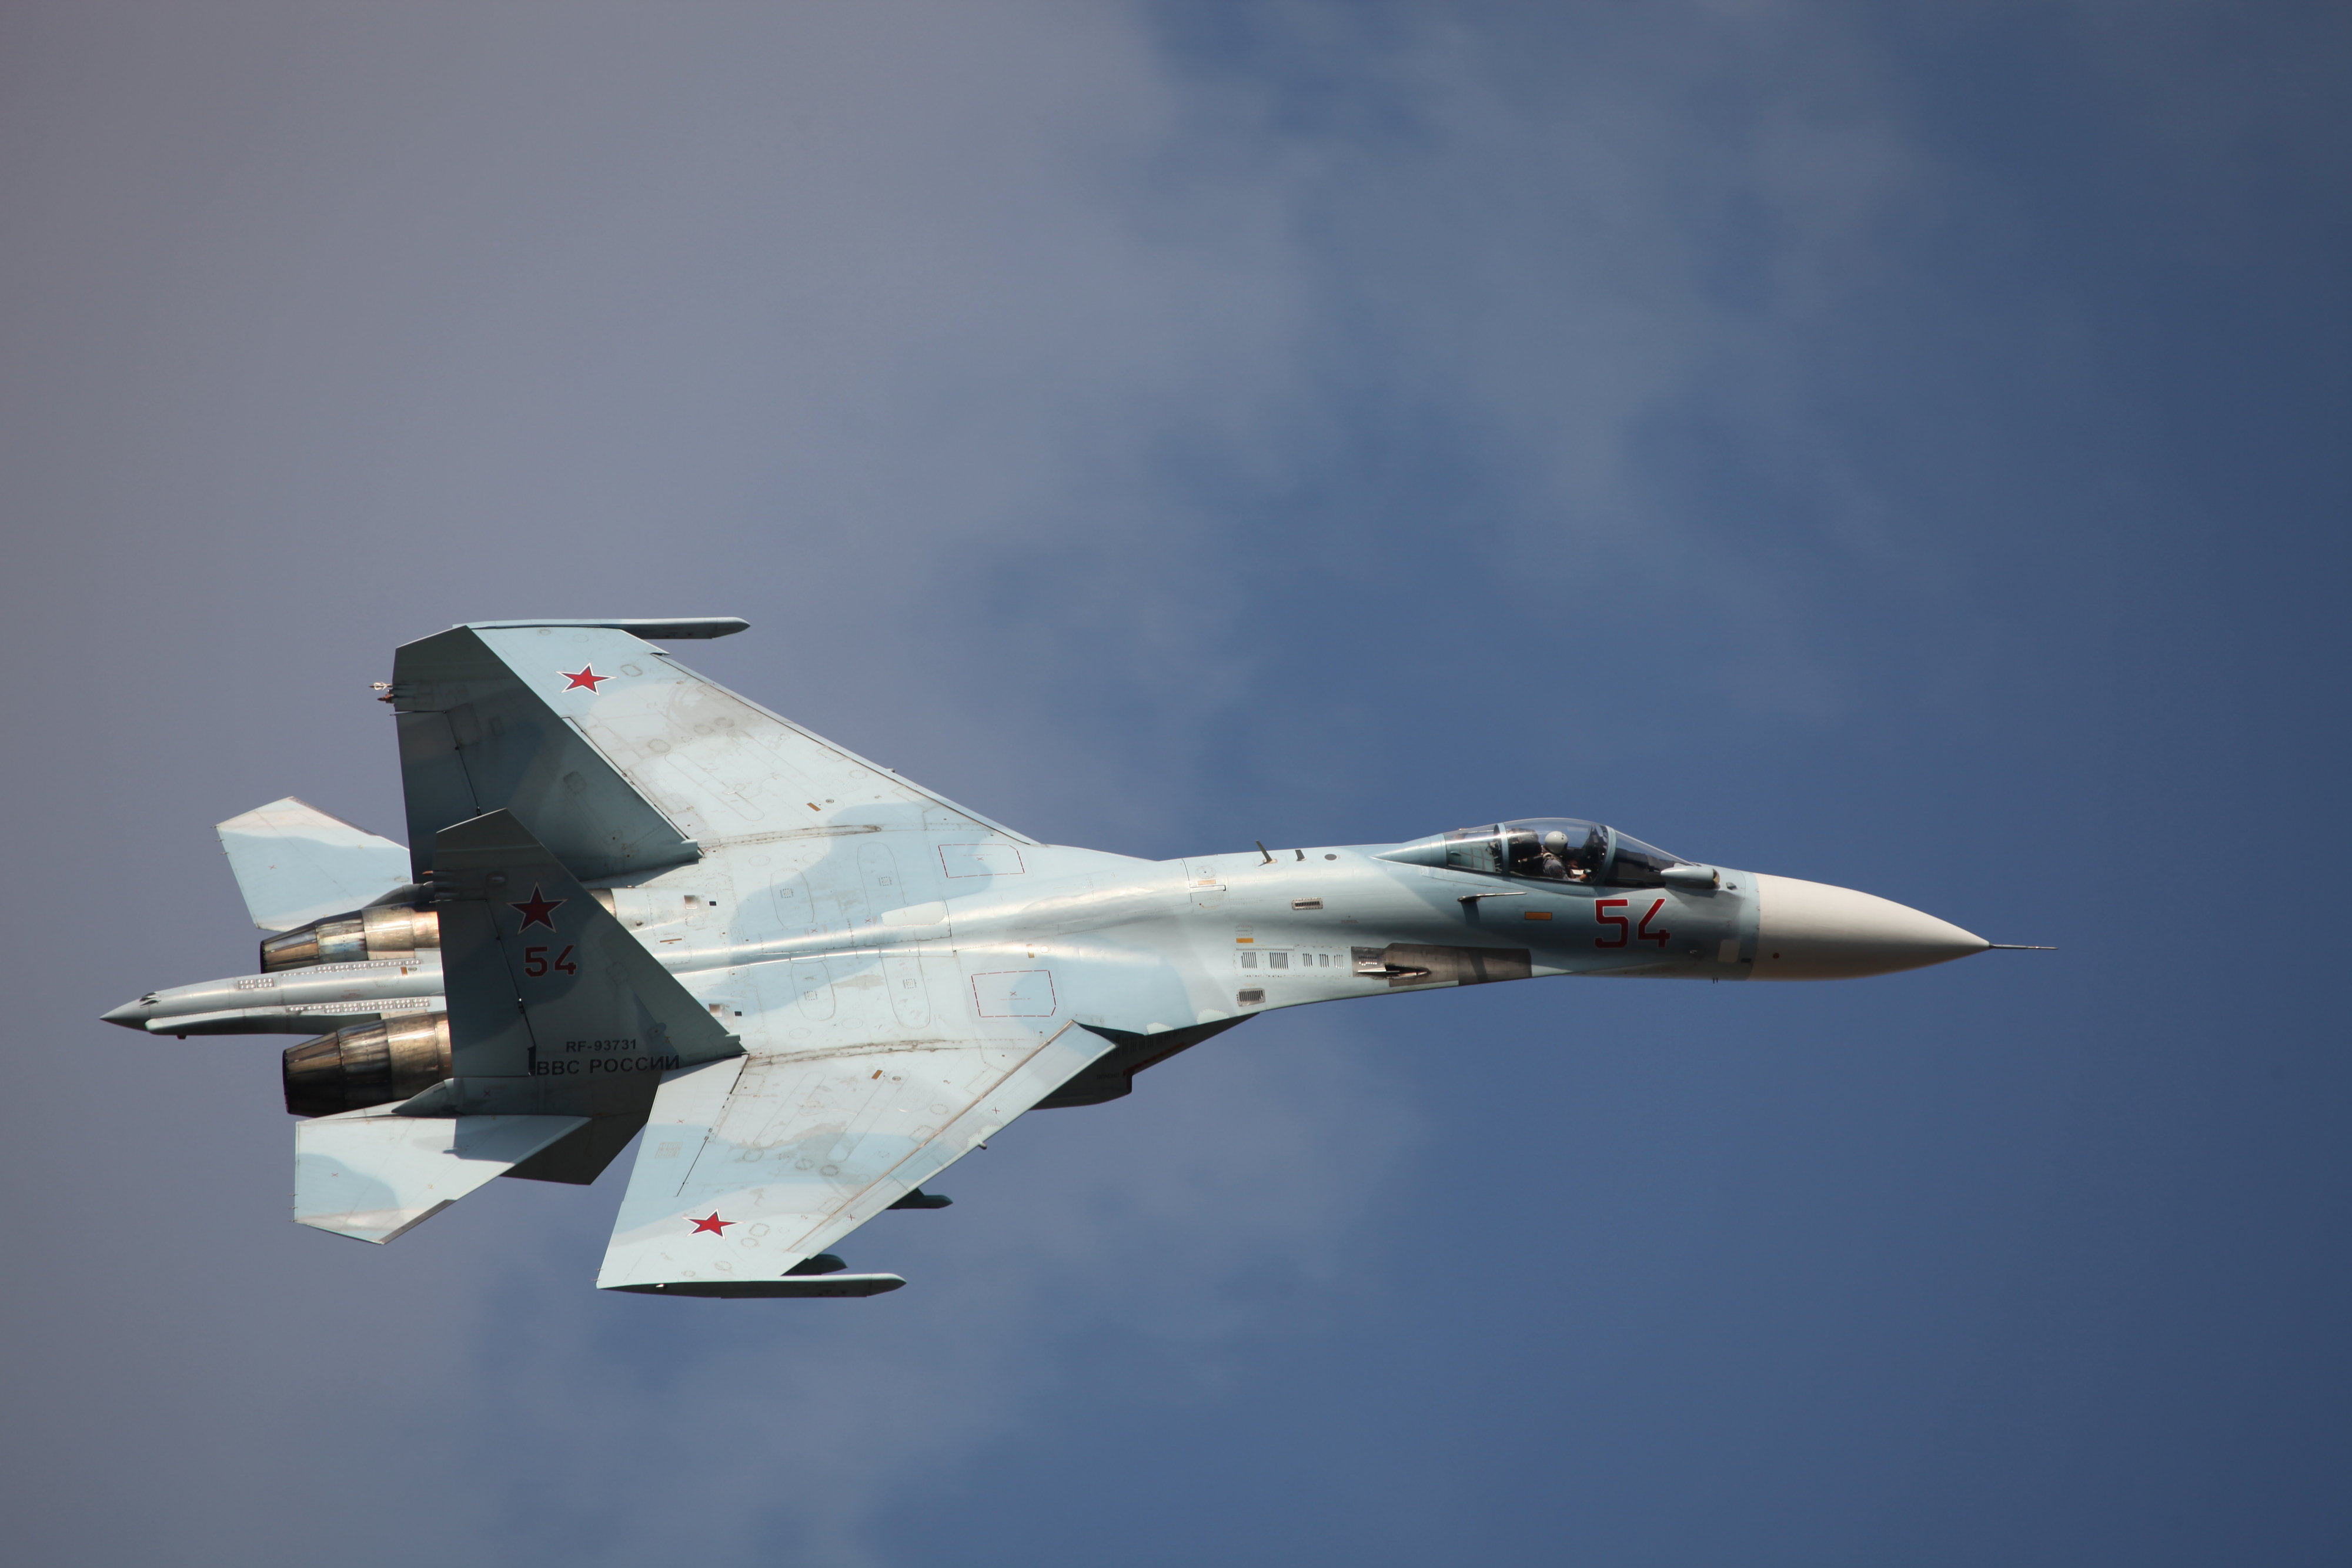 vertical wallpaper military, sukhoi su 35, air force, aircraft, jet fighter, warplane, jet fighters